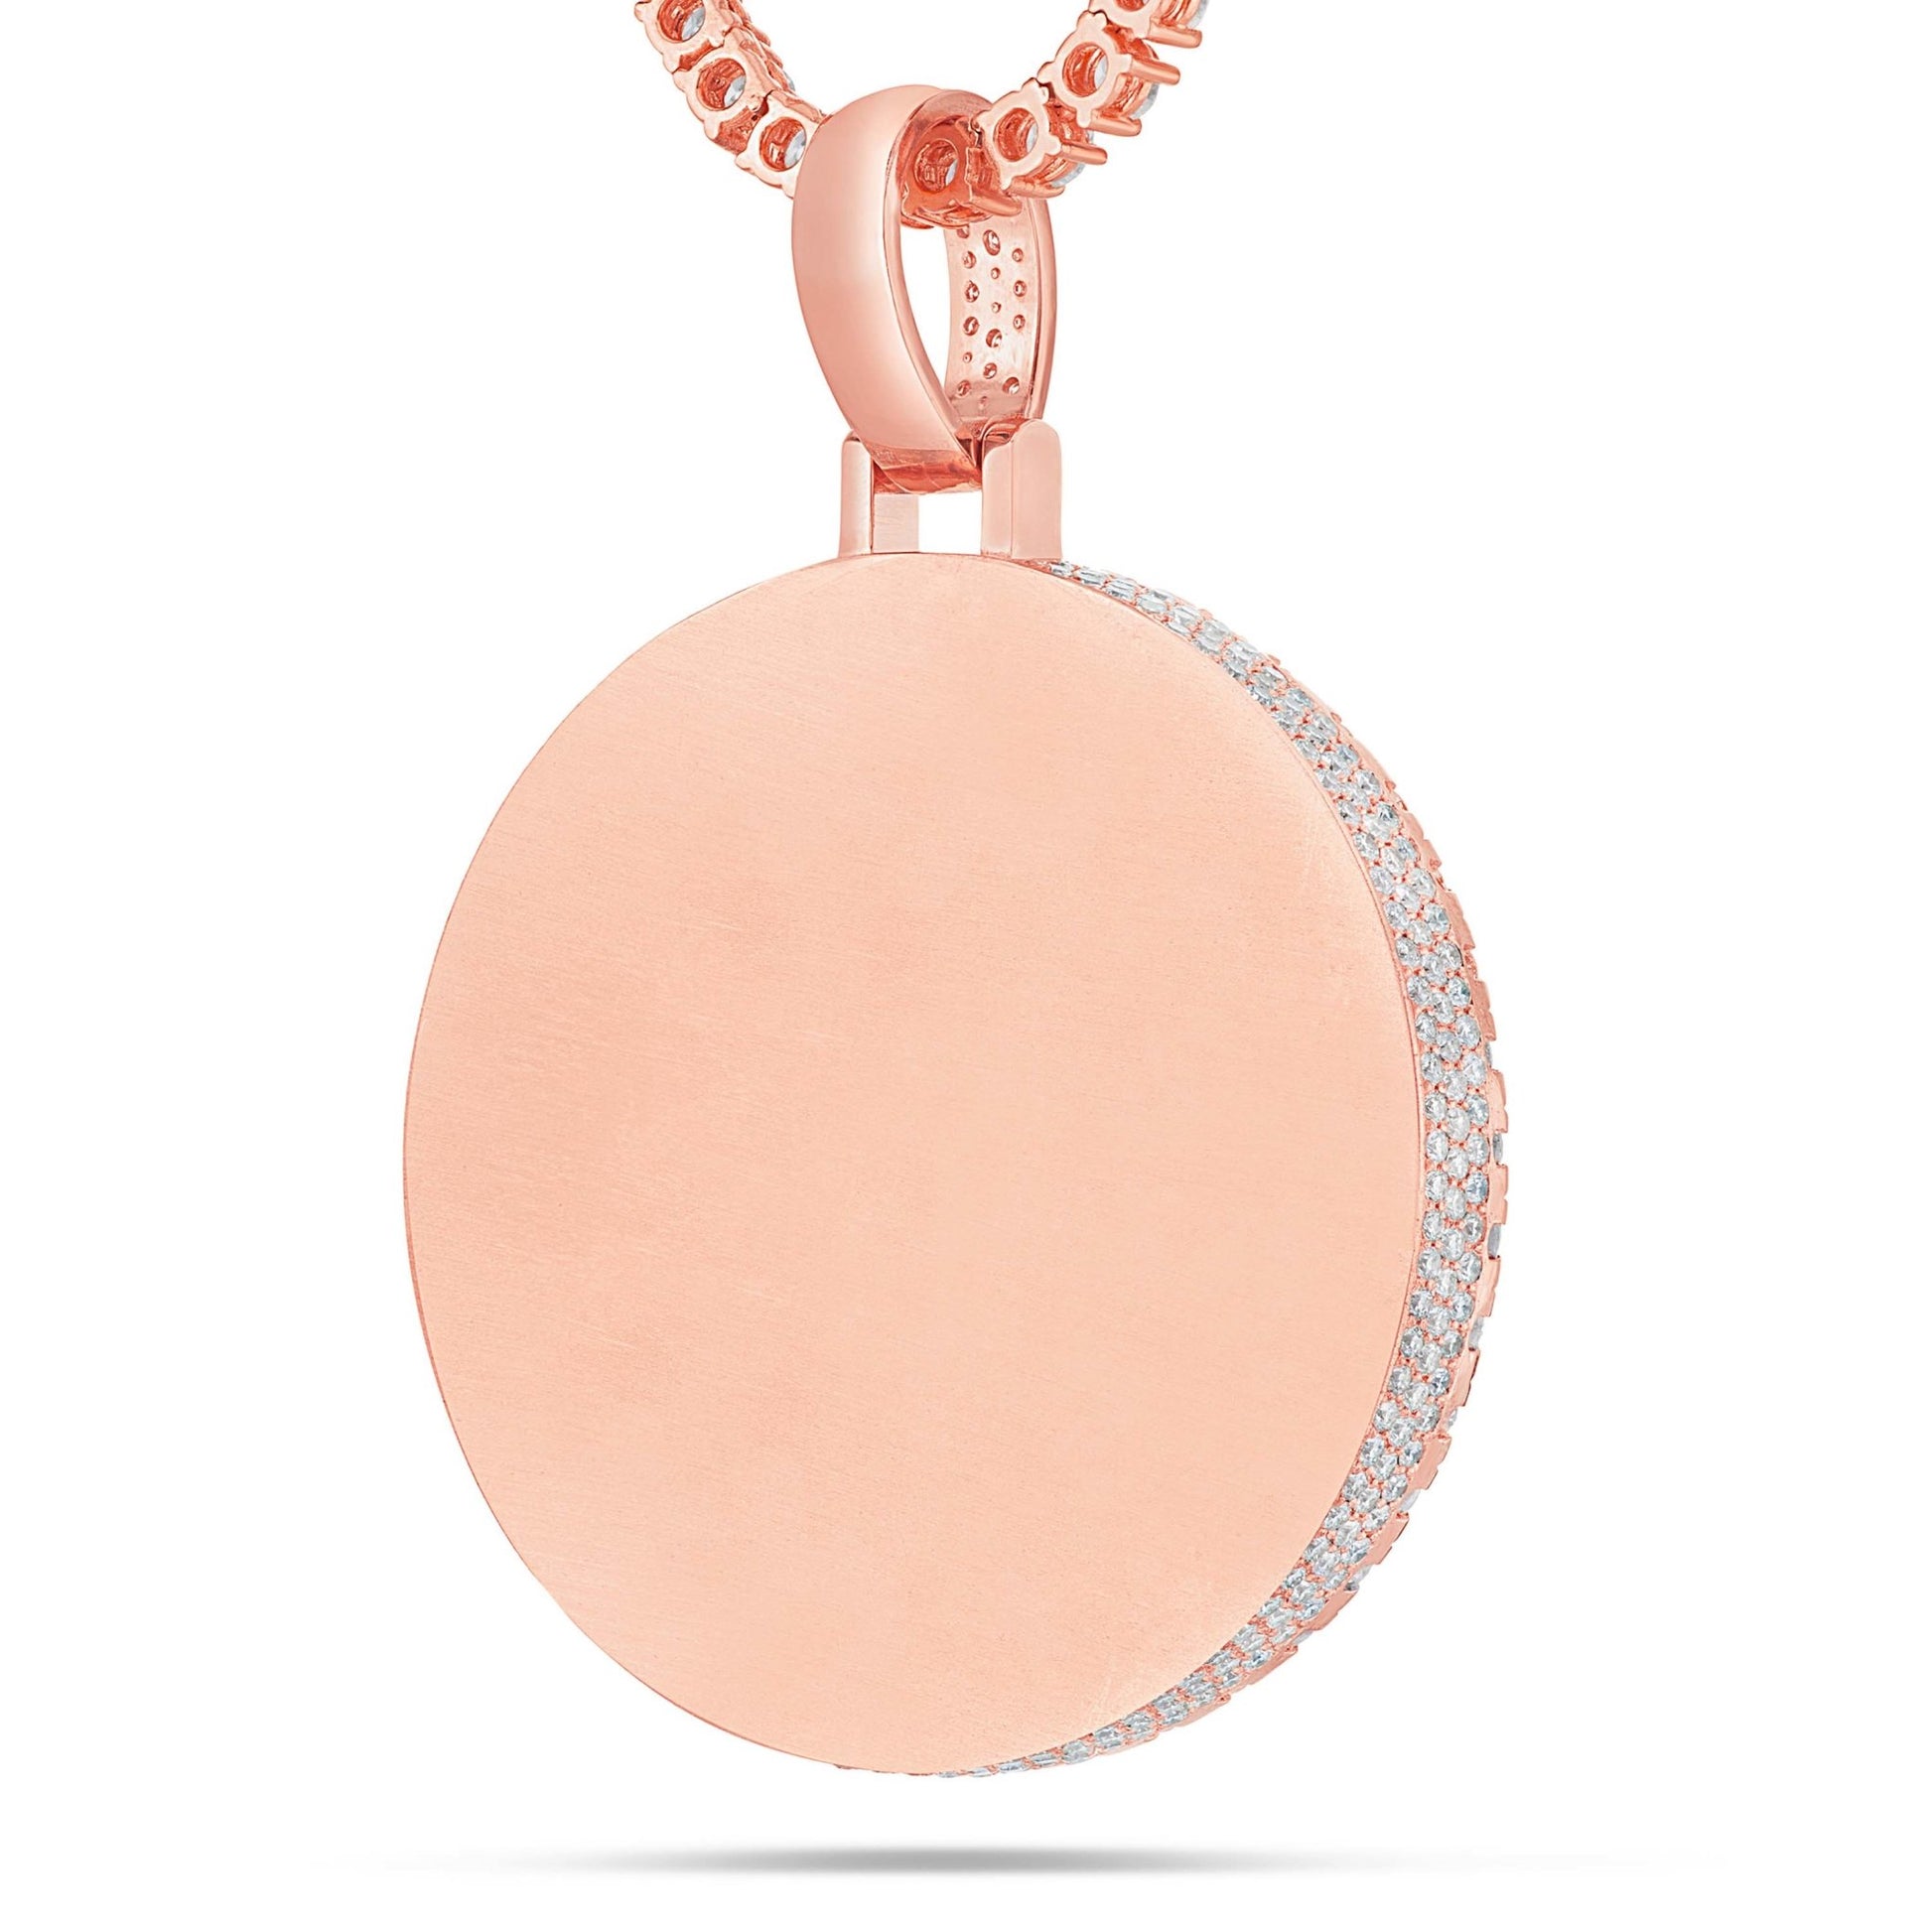 Hollywood Diamond Picture Pendant, 2 Inches - Shyne Jewelers 160-00079 Rose Gold Shyne Jewelers